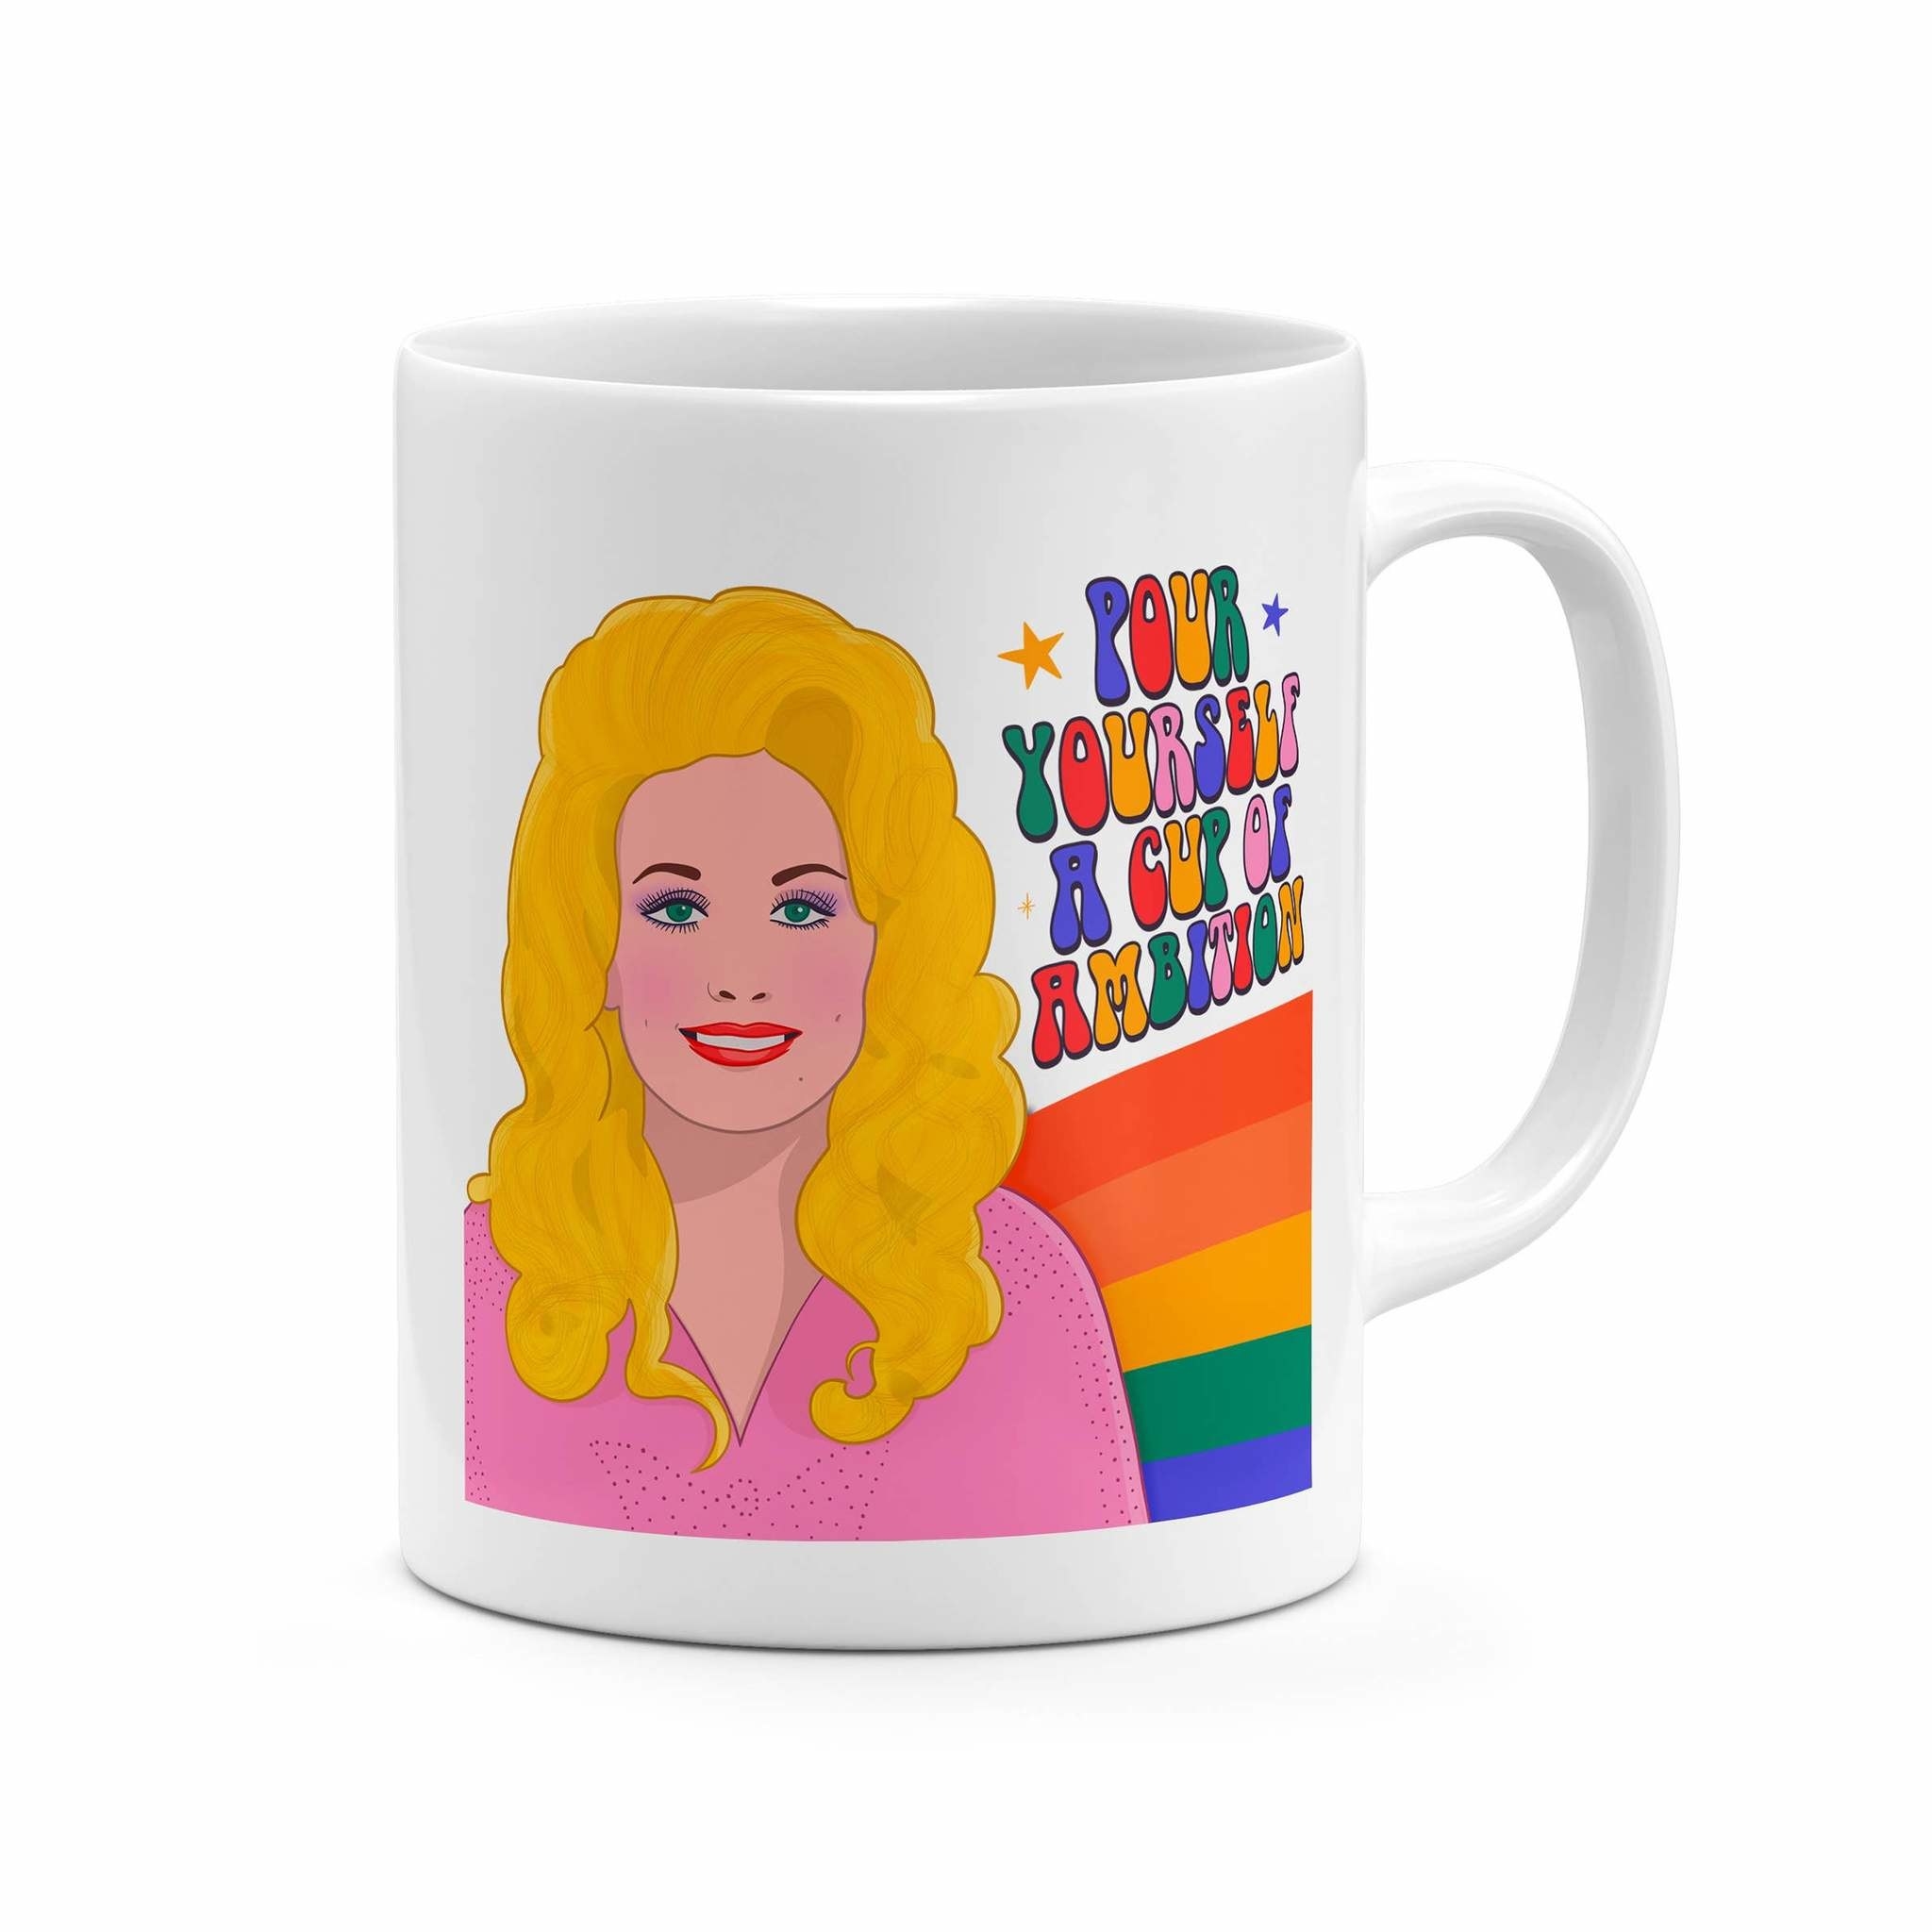 the dolly a cup of ambition mug